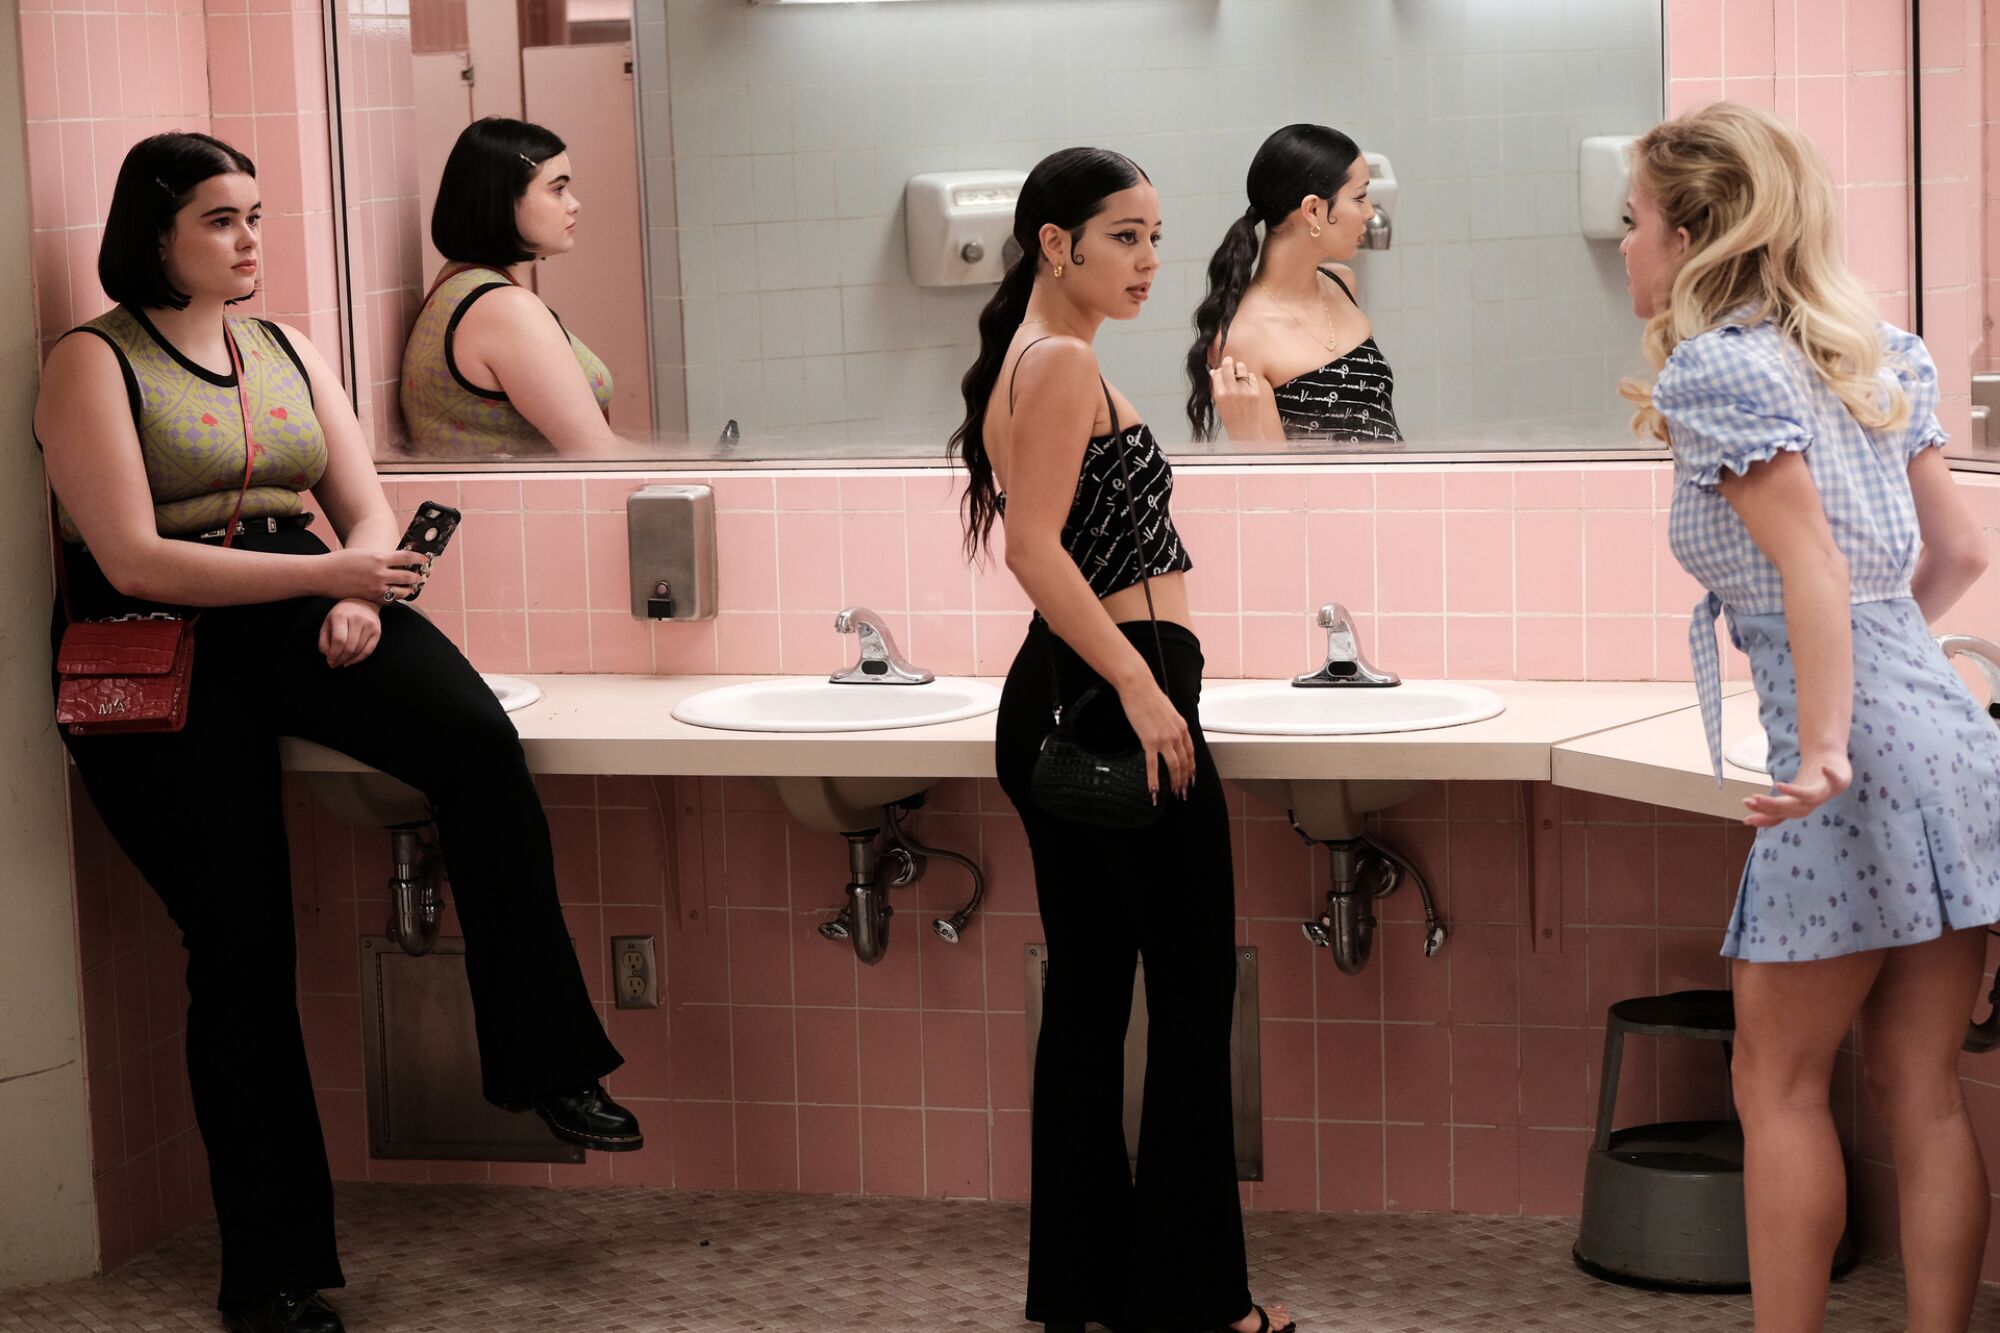 Three women and their reflections in the over-sink mirror of a public bathroom with pink tile.